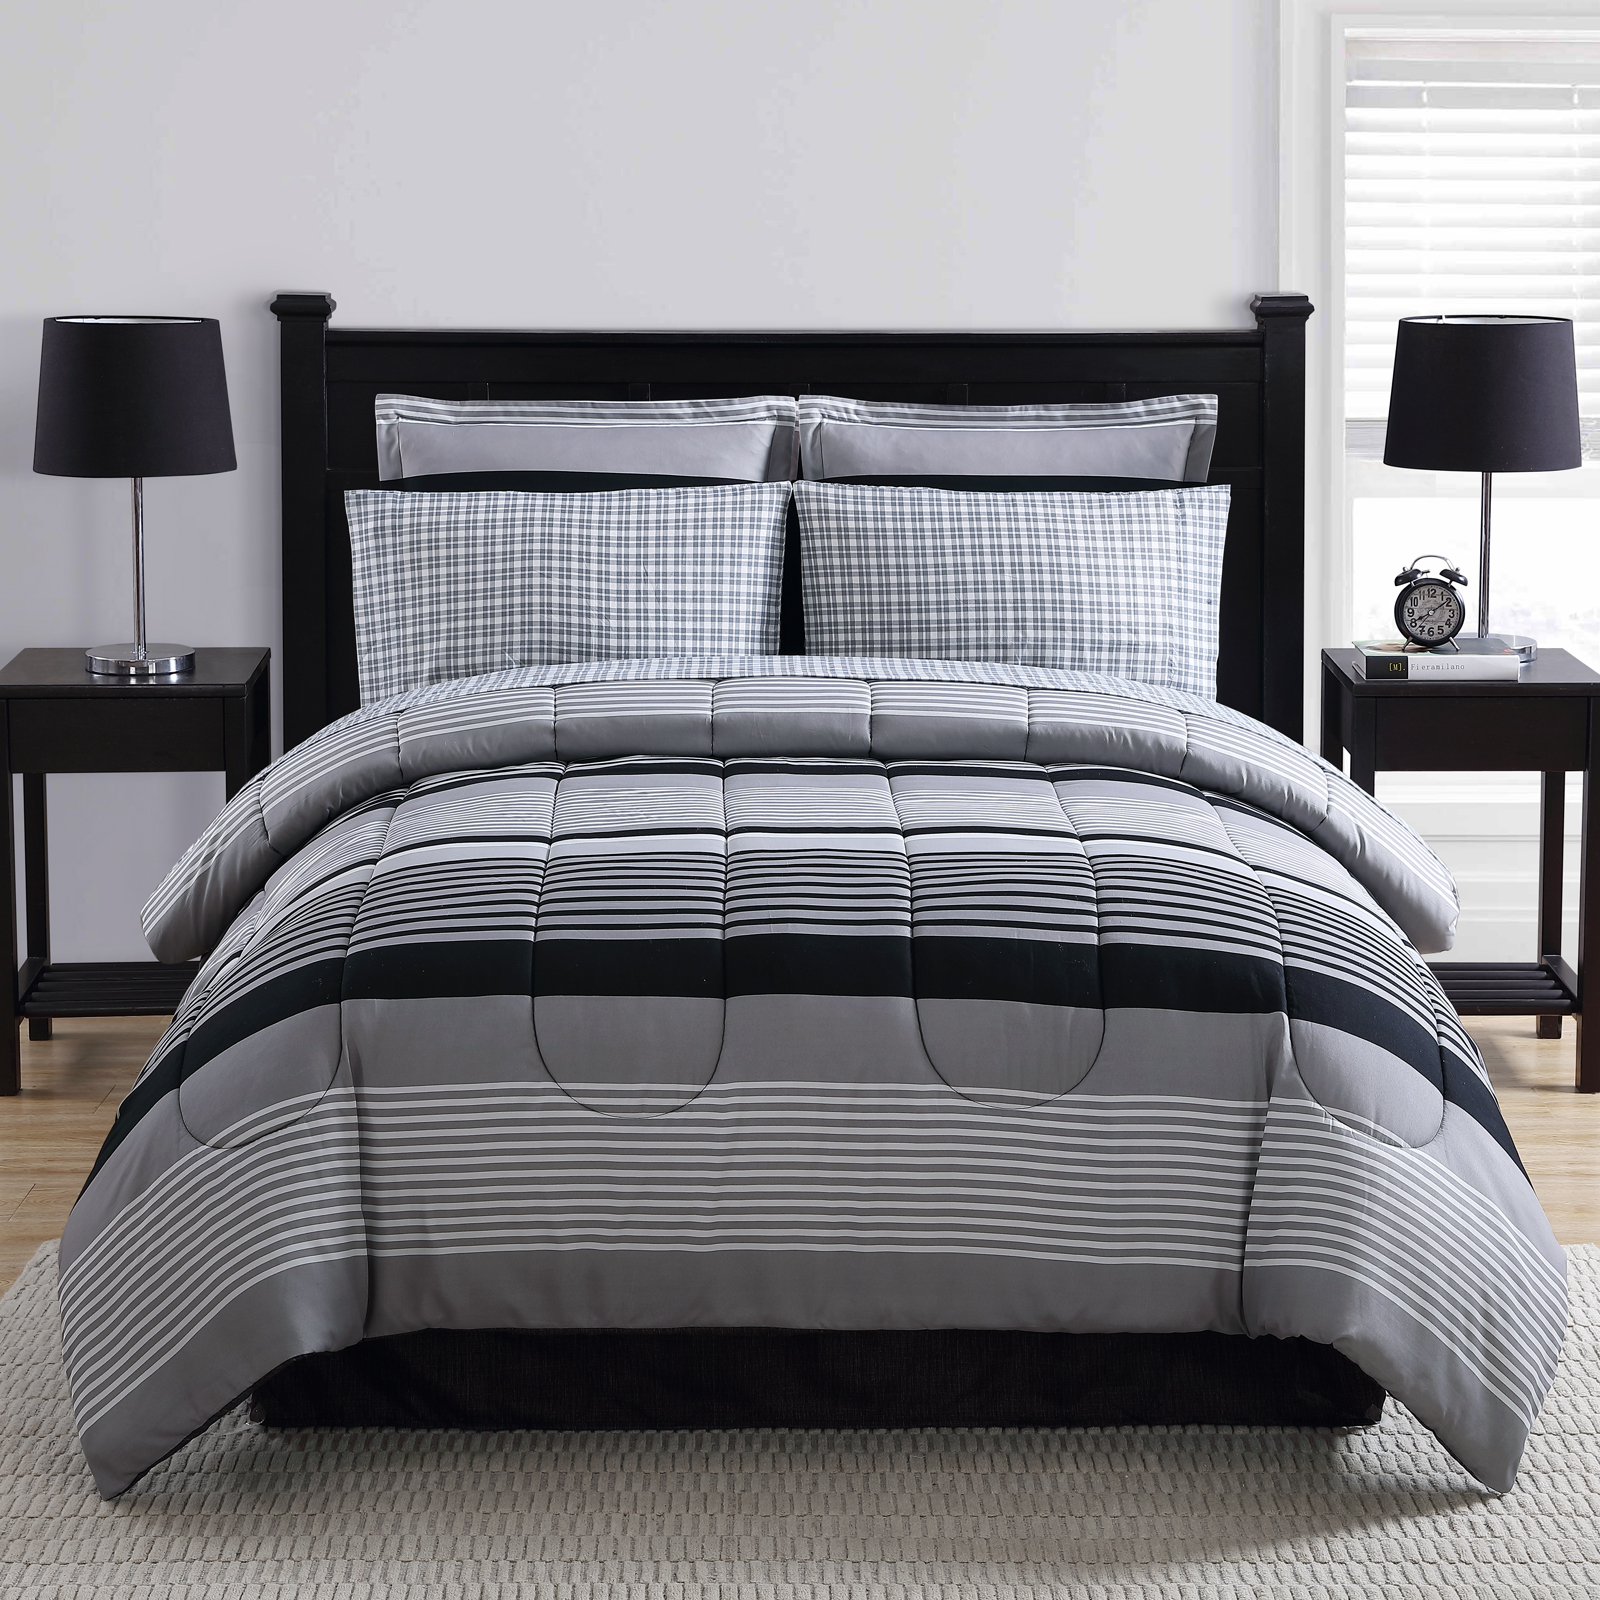 Simple Black And White Bedding for Small Space